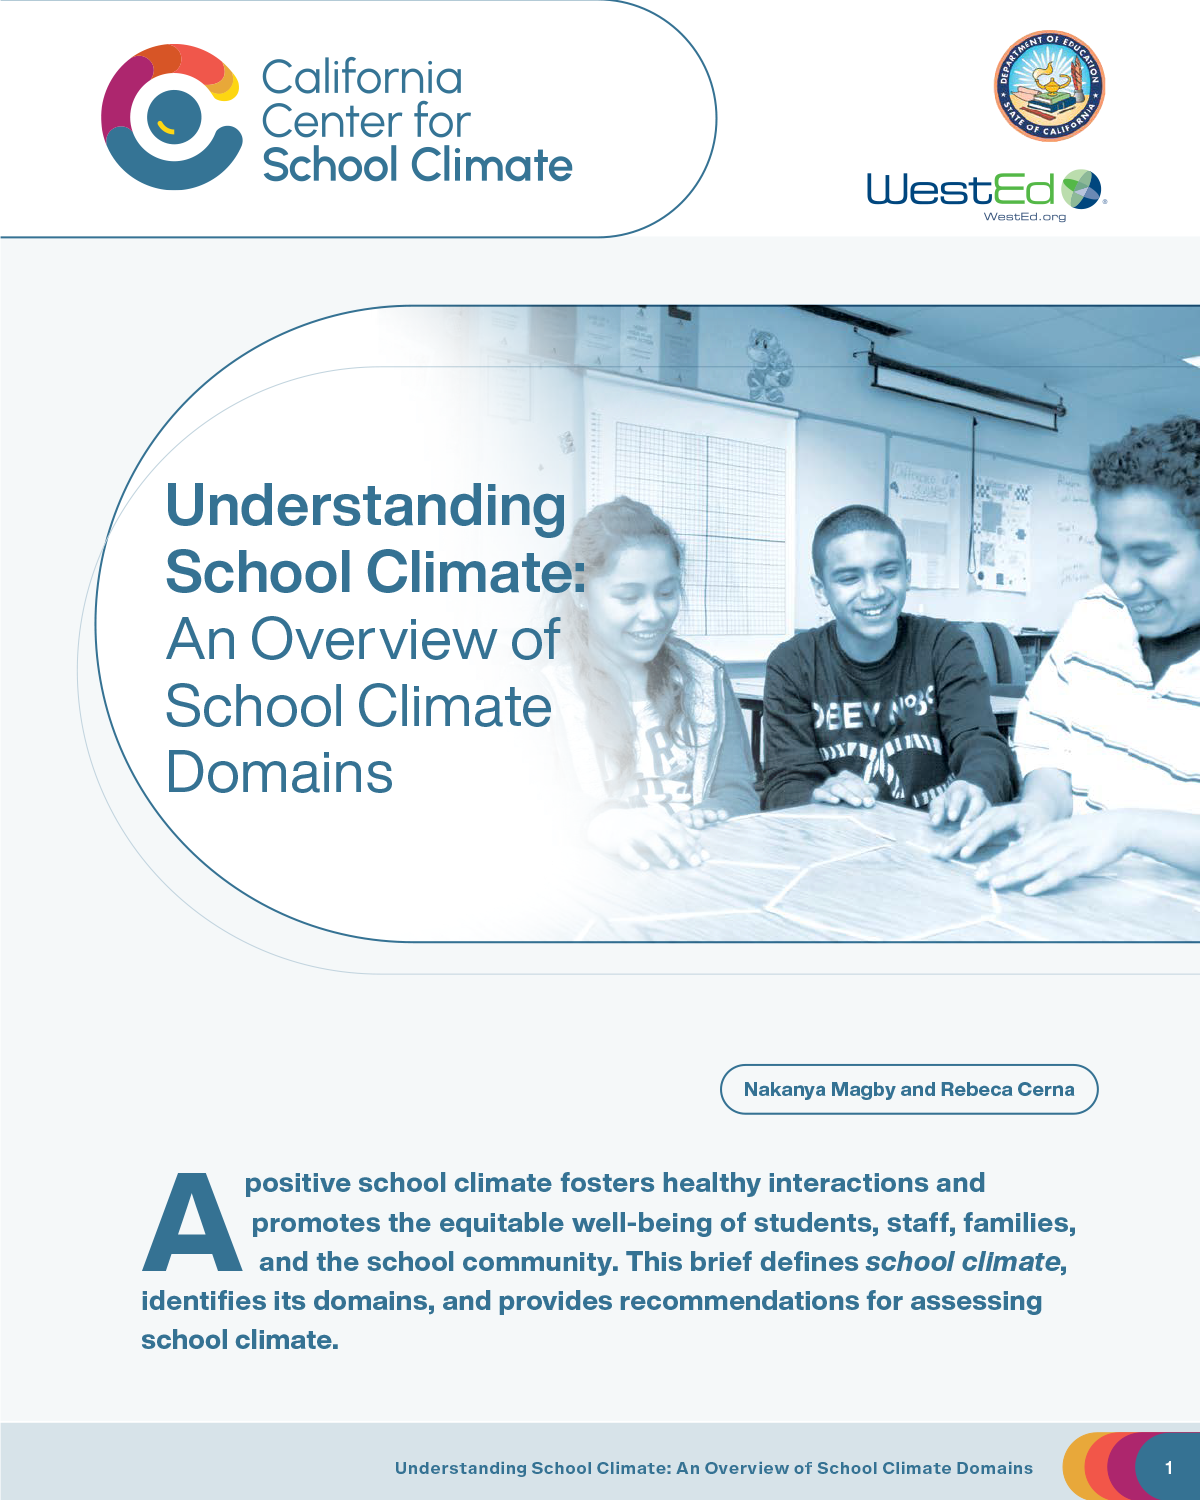 California Center for School Climate. Understanding School Climate: An Overview of School Climate Domains